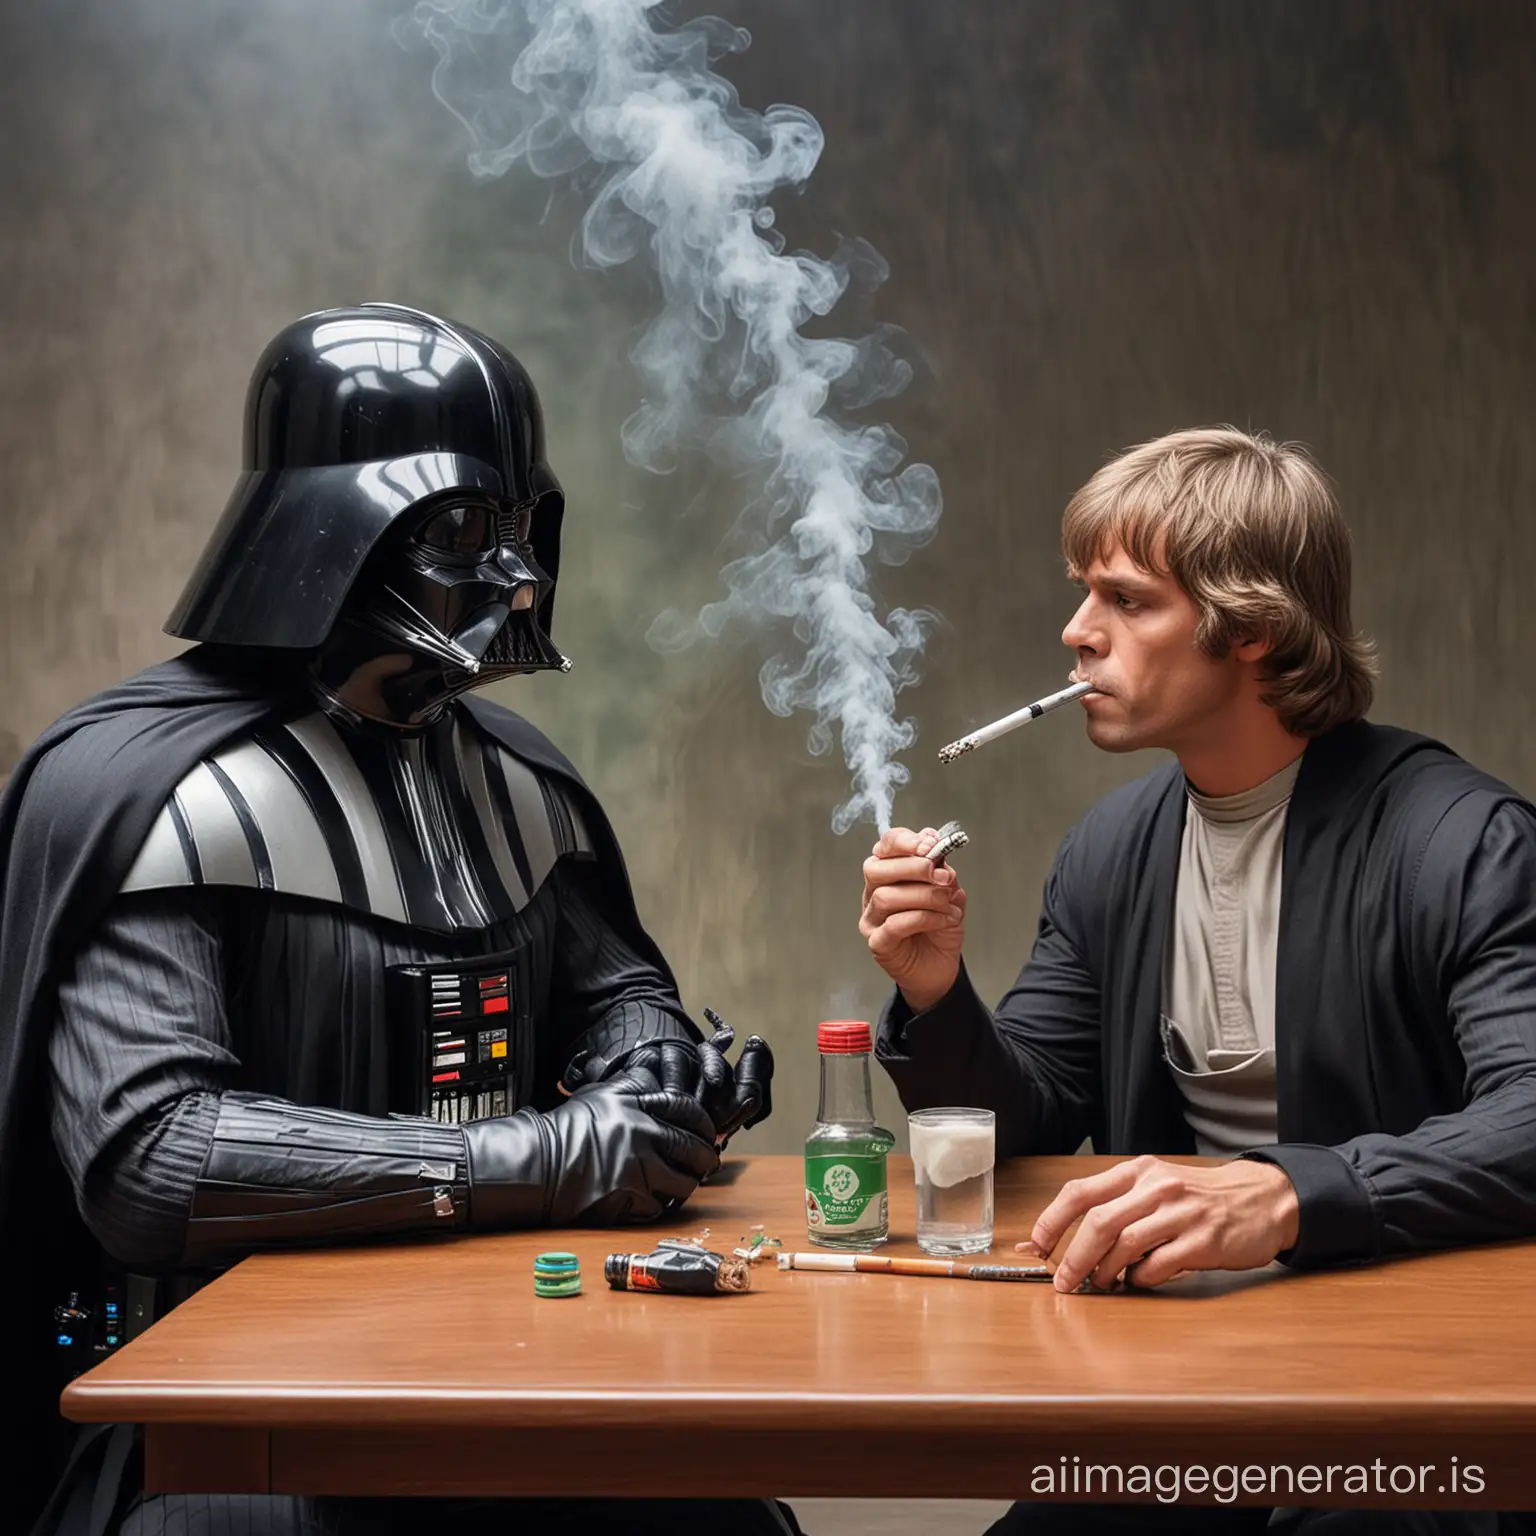 Intergalactic-FatherSon-Bonding-with-Cannabis-and-Illicit-Substances